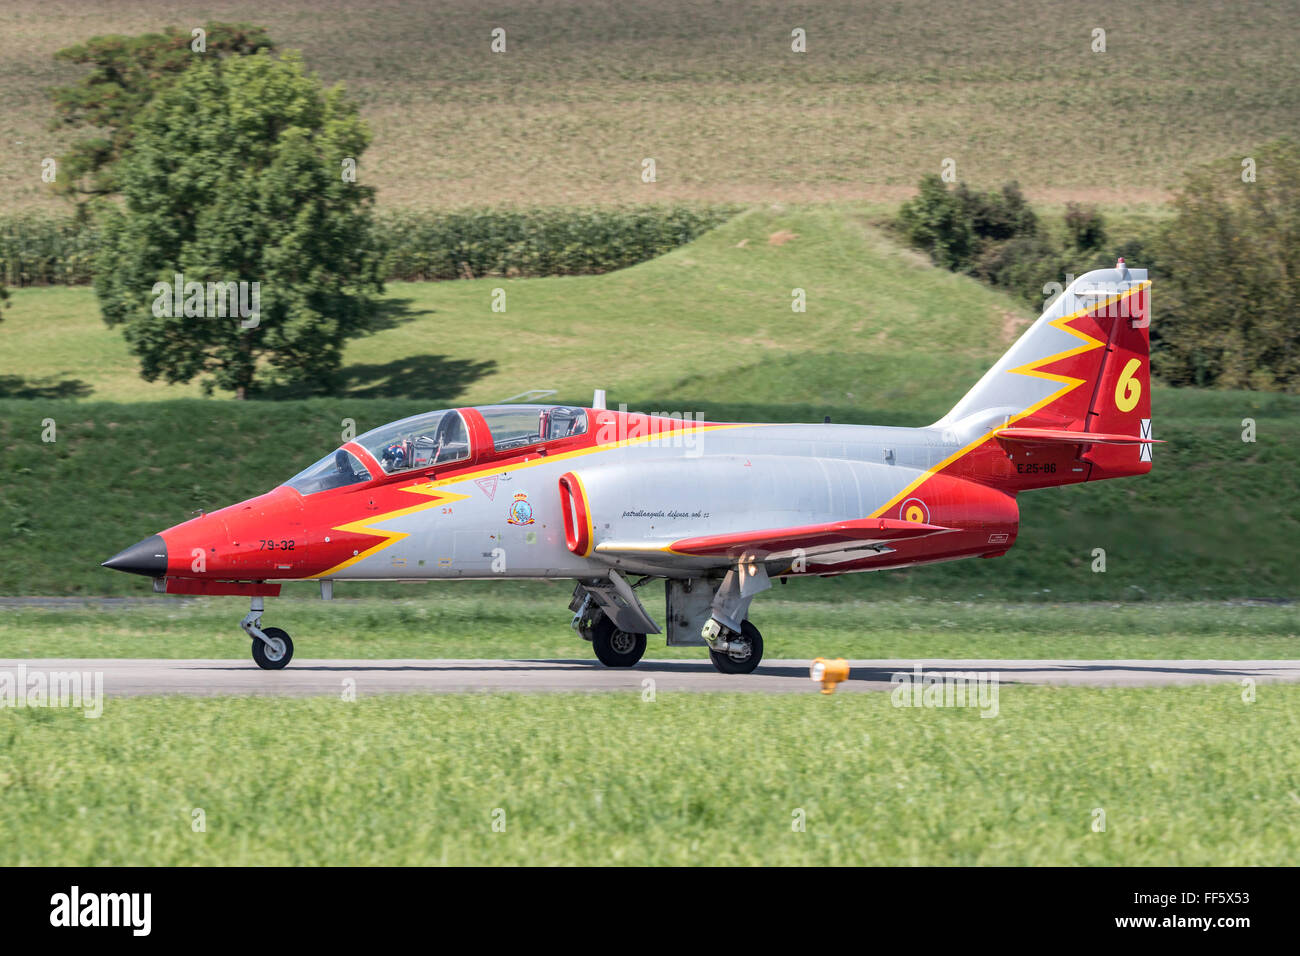 CASA C-101 Aviojet  (Serial E25-86 - 79-32) of “Patrulla Aguila” the formation aerobatic team of the Spanish Air force. Stock Photo